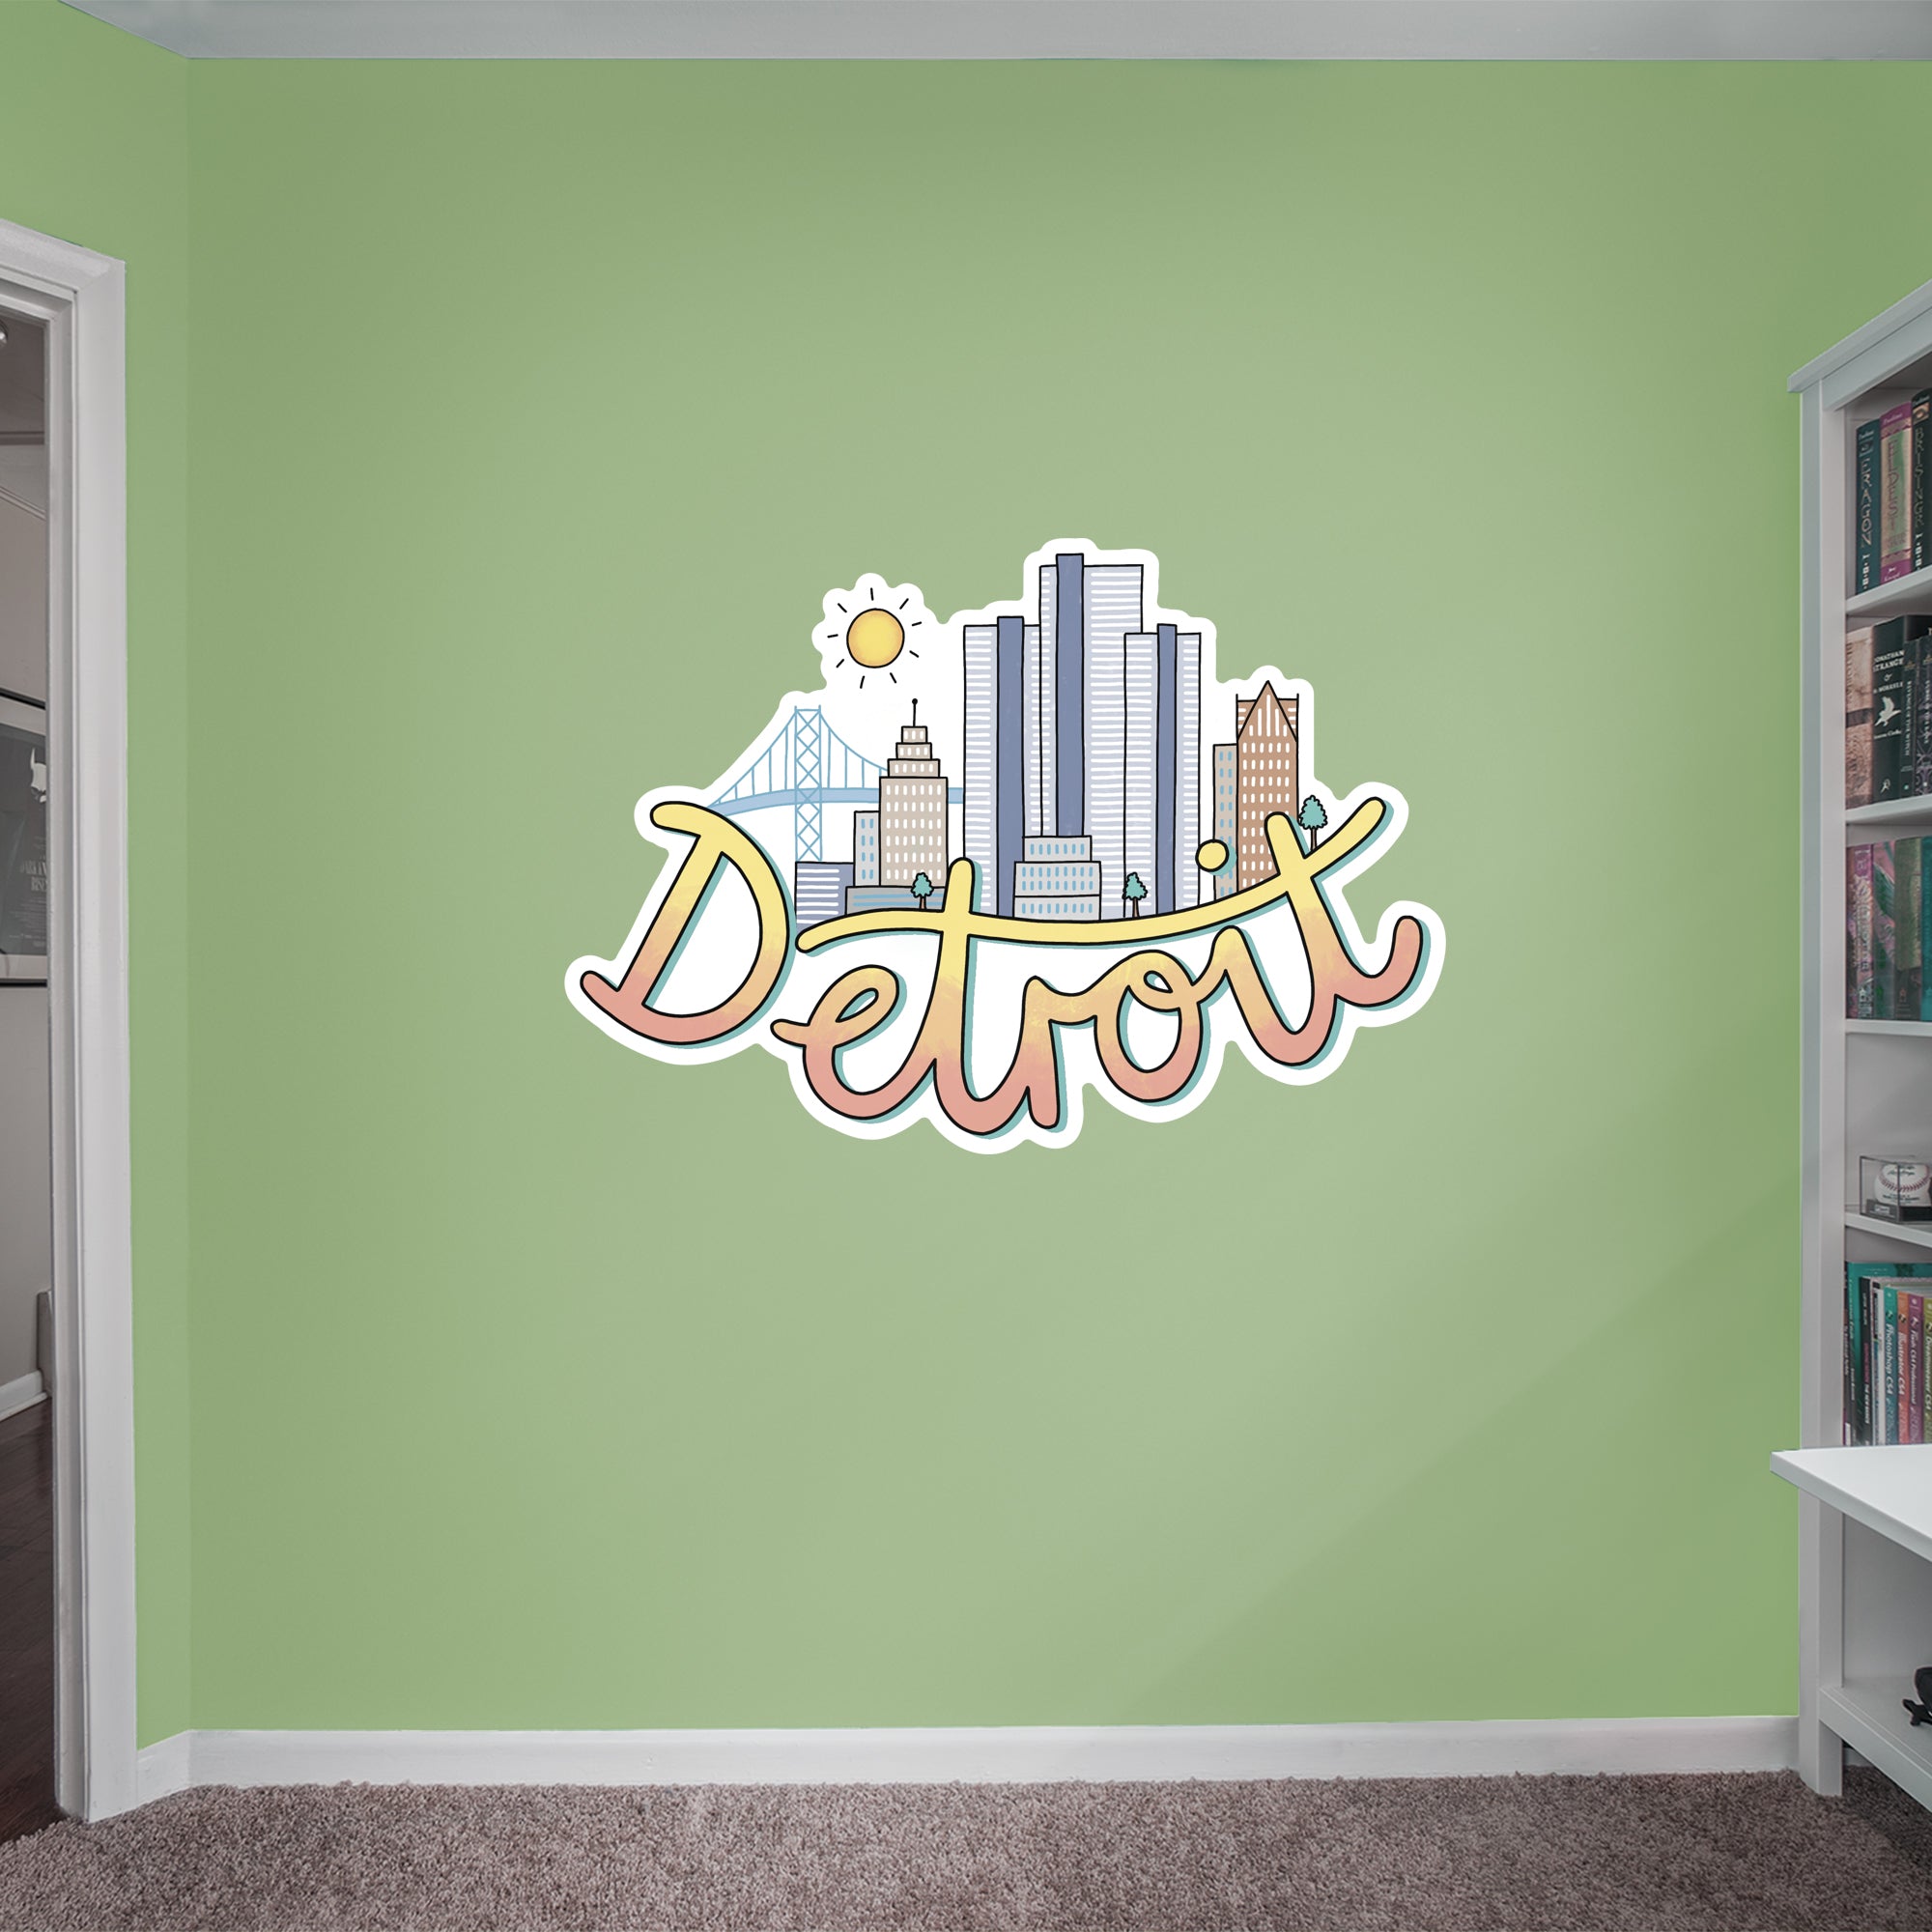 Detroit - Officially Licensed Big Moods Removable Wall Decal Giant Decal (50"W x 35"H) by Fathead | Vinyl